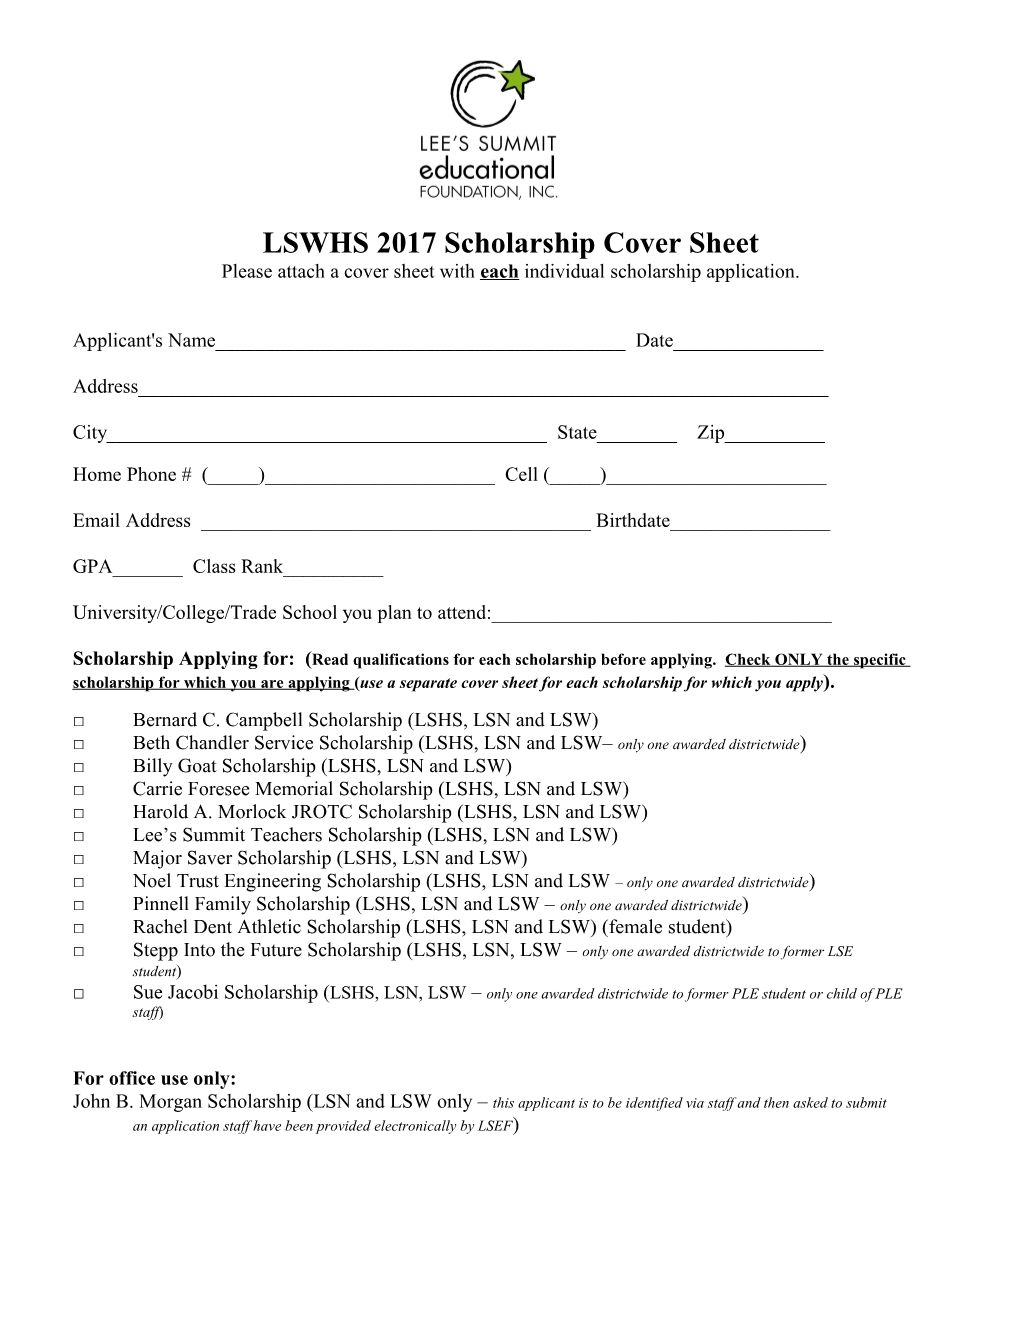 LSWHS 2017 Scholarship Cover Sheet s1